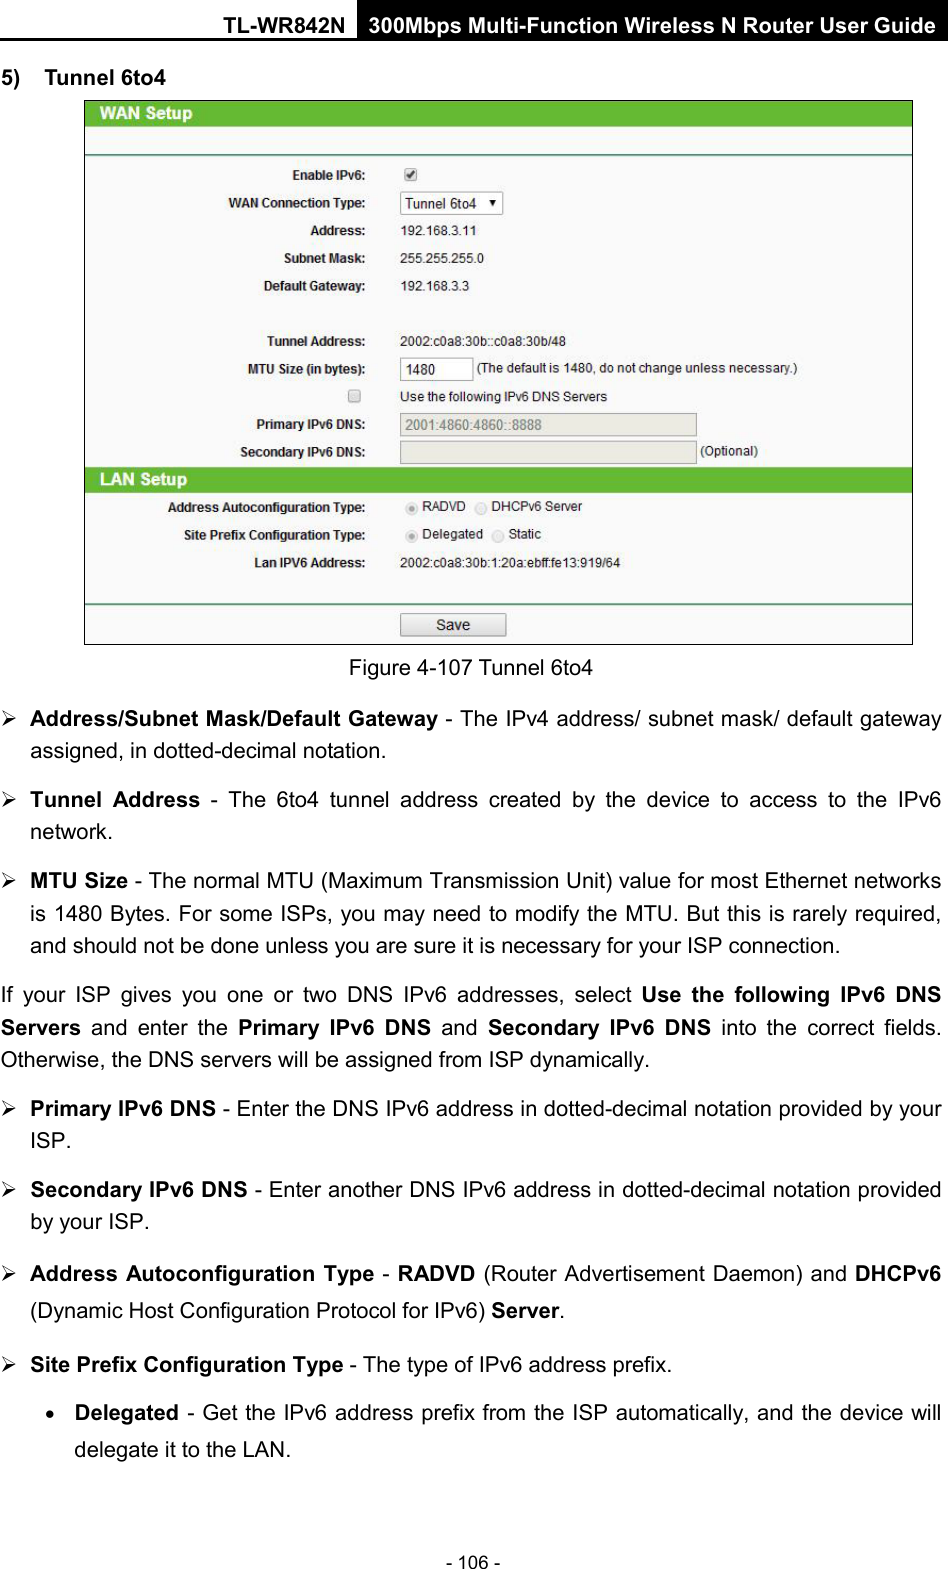 TL-WR842N 300Mbps Multi-Function Wireless N Router User Guide  - 106 - 5) Tunnel 6to4   Figure 4-107 Tunnel 6to4  Address/Subnet Mask/Default Gateway - The IPv4 address/ subnet mask/ default gateway assigned, in dotted-decimal notation.  Tunnel Address - The 6to4 tunnel address created by the device to access to the IPv6 network.  MTU Size - The normal MTU (Maximum Transmission Unit) value for most Ethernet networks is 1480 Bytes. For some ISPs, you may need to modify the MTU. But this is rarely required, and should not be done unless you are sure it is necessary for your ISP connection. If your ISP gives you one or two DNS IPv6 addresses, select Use the following IPv6 DNS Servers and enter the Primary IPv6 DNS and  Secondary IPv6 DNS into the correct fields. Otherwise, the DNS servers will be assigned from ISP dynamically.  Primary IPv6 DNS - Enter the DNS IPv6 address in dotted-decimal notation provided by your ISP.  Secondary IPv6 DNS - Enter another DNS IPv6 address in dotted-decimal notation provided by your ISP.  Address Autoconfiguration Type - RADVD (Router Advertisement Daemon) and DHCPv6 (Dynamic Host Configuration Protocol for IPv6) Server.  Site Prefix Configuration Type - The type of IPv6 address prefix. • Delegated - Get the IPv6 address prefix from the ISP automatically, and the device will delegate it to the LAN. 